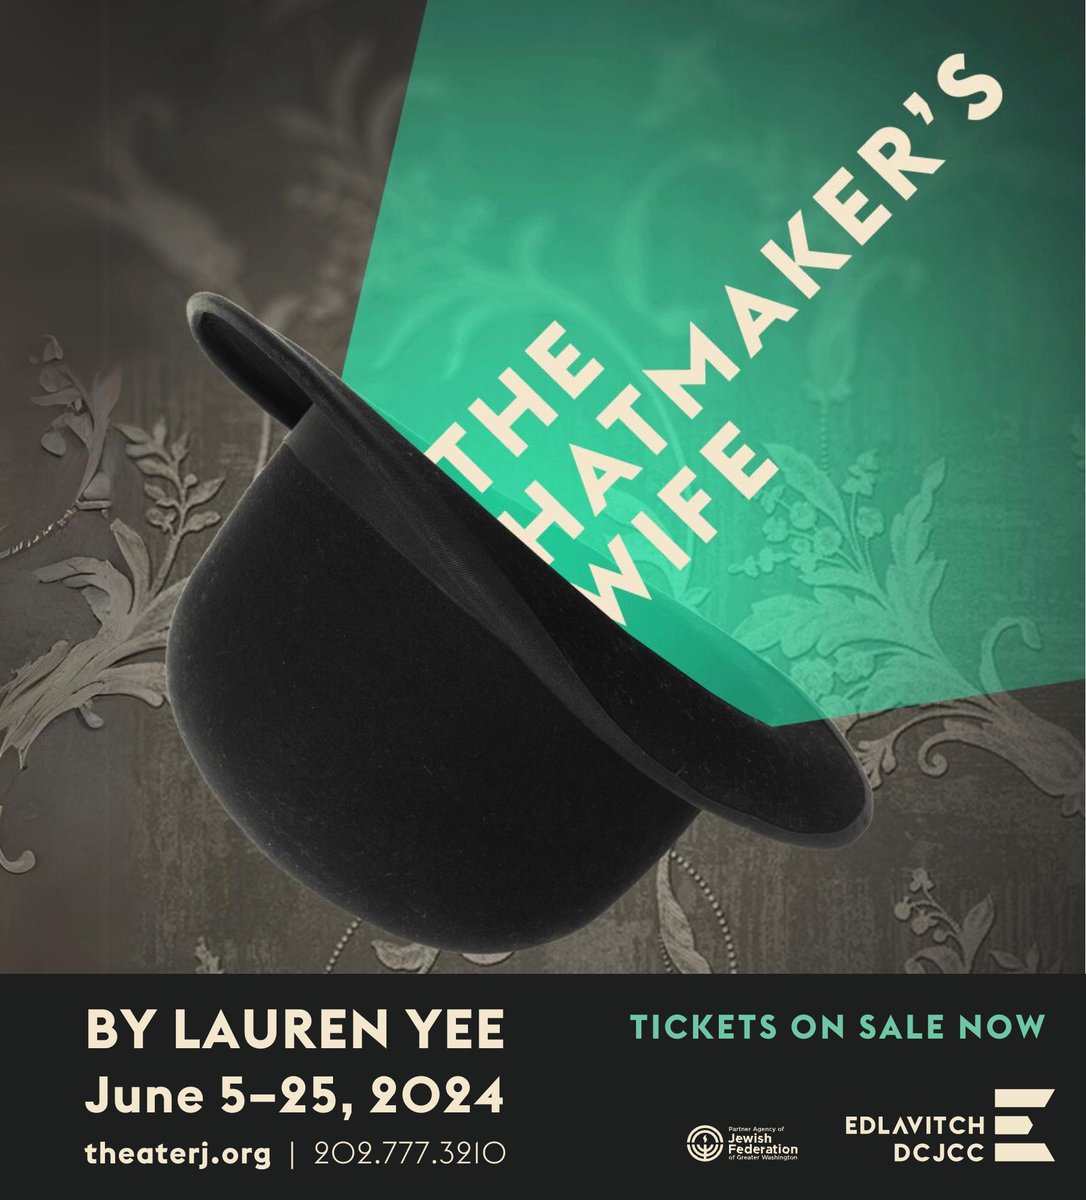 THE HATMAKER'S WIFE 

Magic and realism collide in this modern fable about learning to love. A young woman moves in with her boyfriend, and when she has trouble getting comfortable, her strange new home seems determined to help out, literally. (1/2)